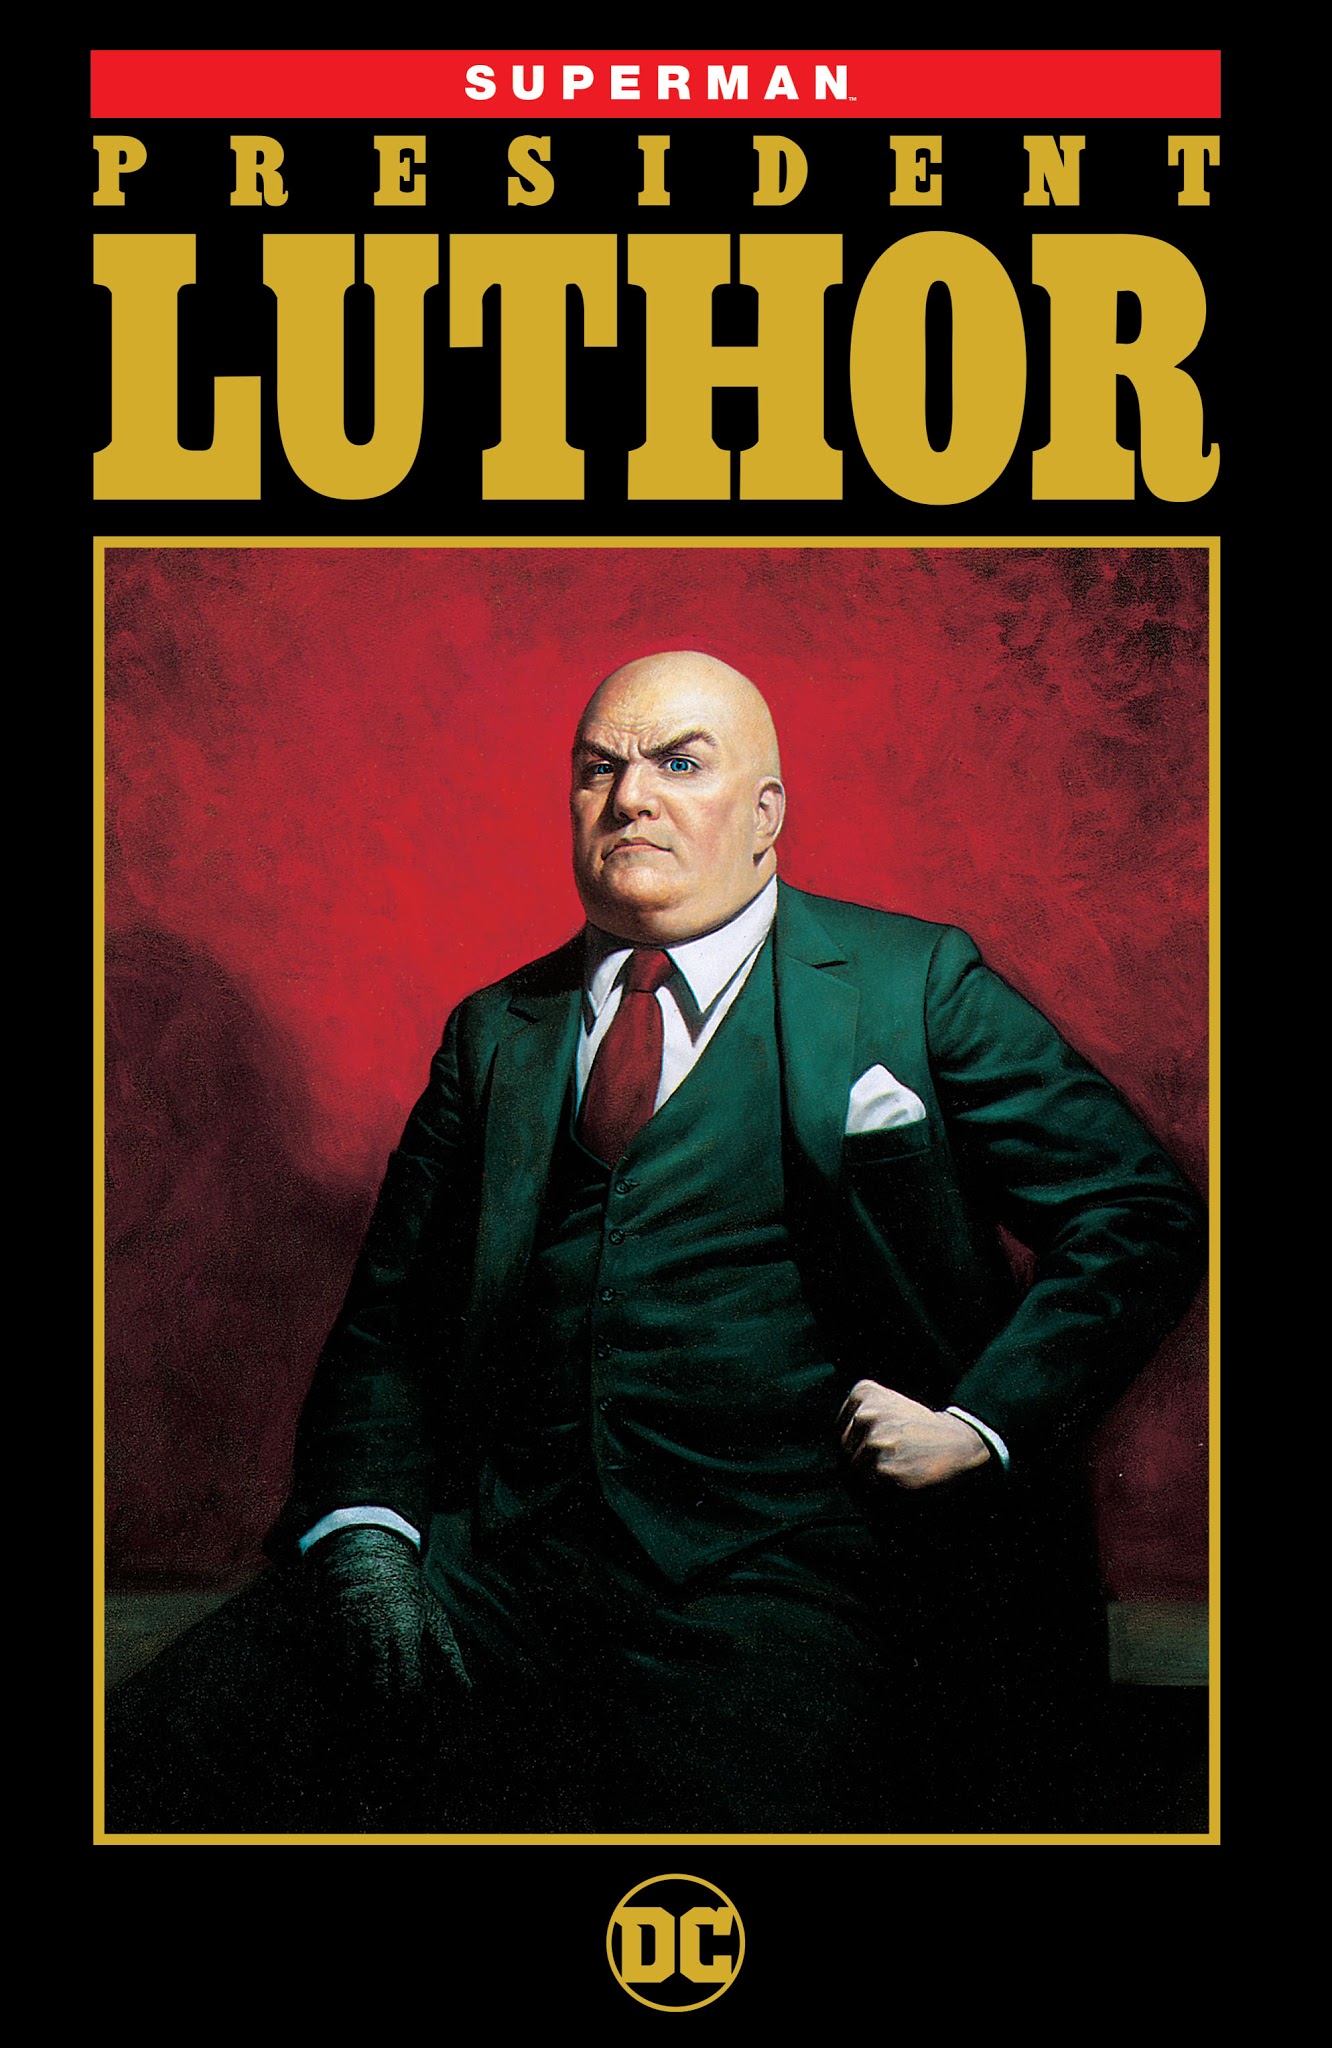 Read online Superman: President Luthor comic -  Issue # TPB - 1